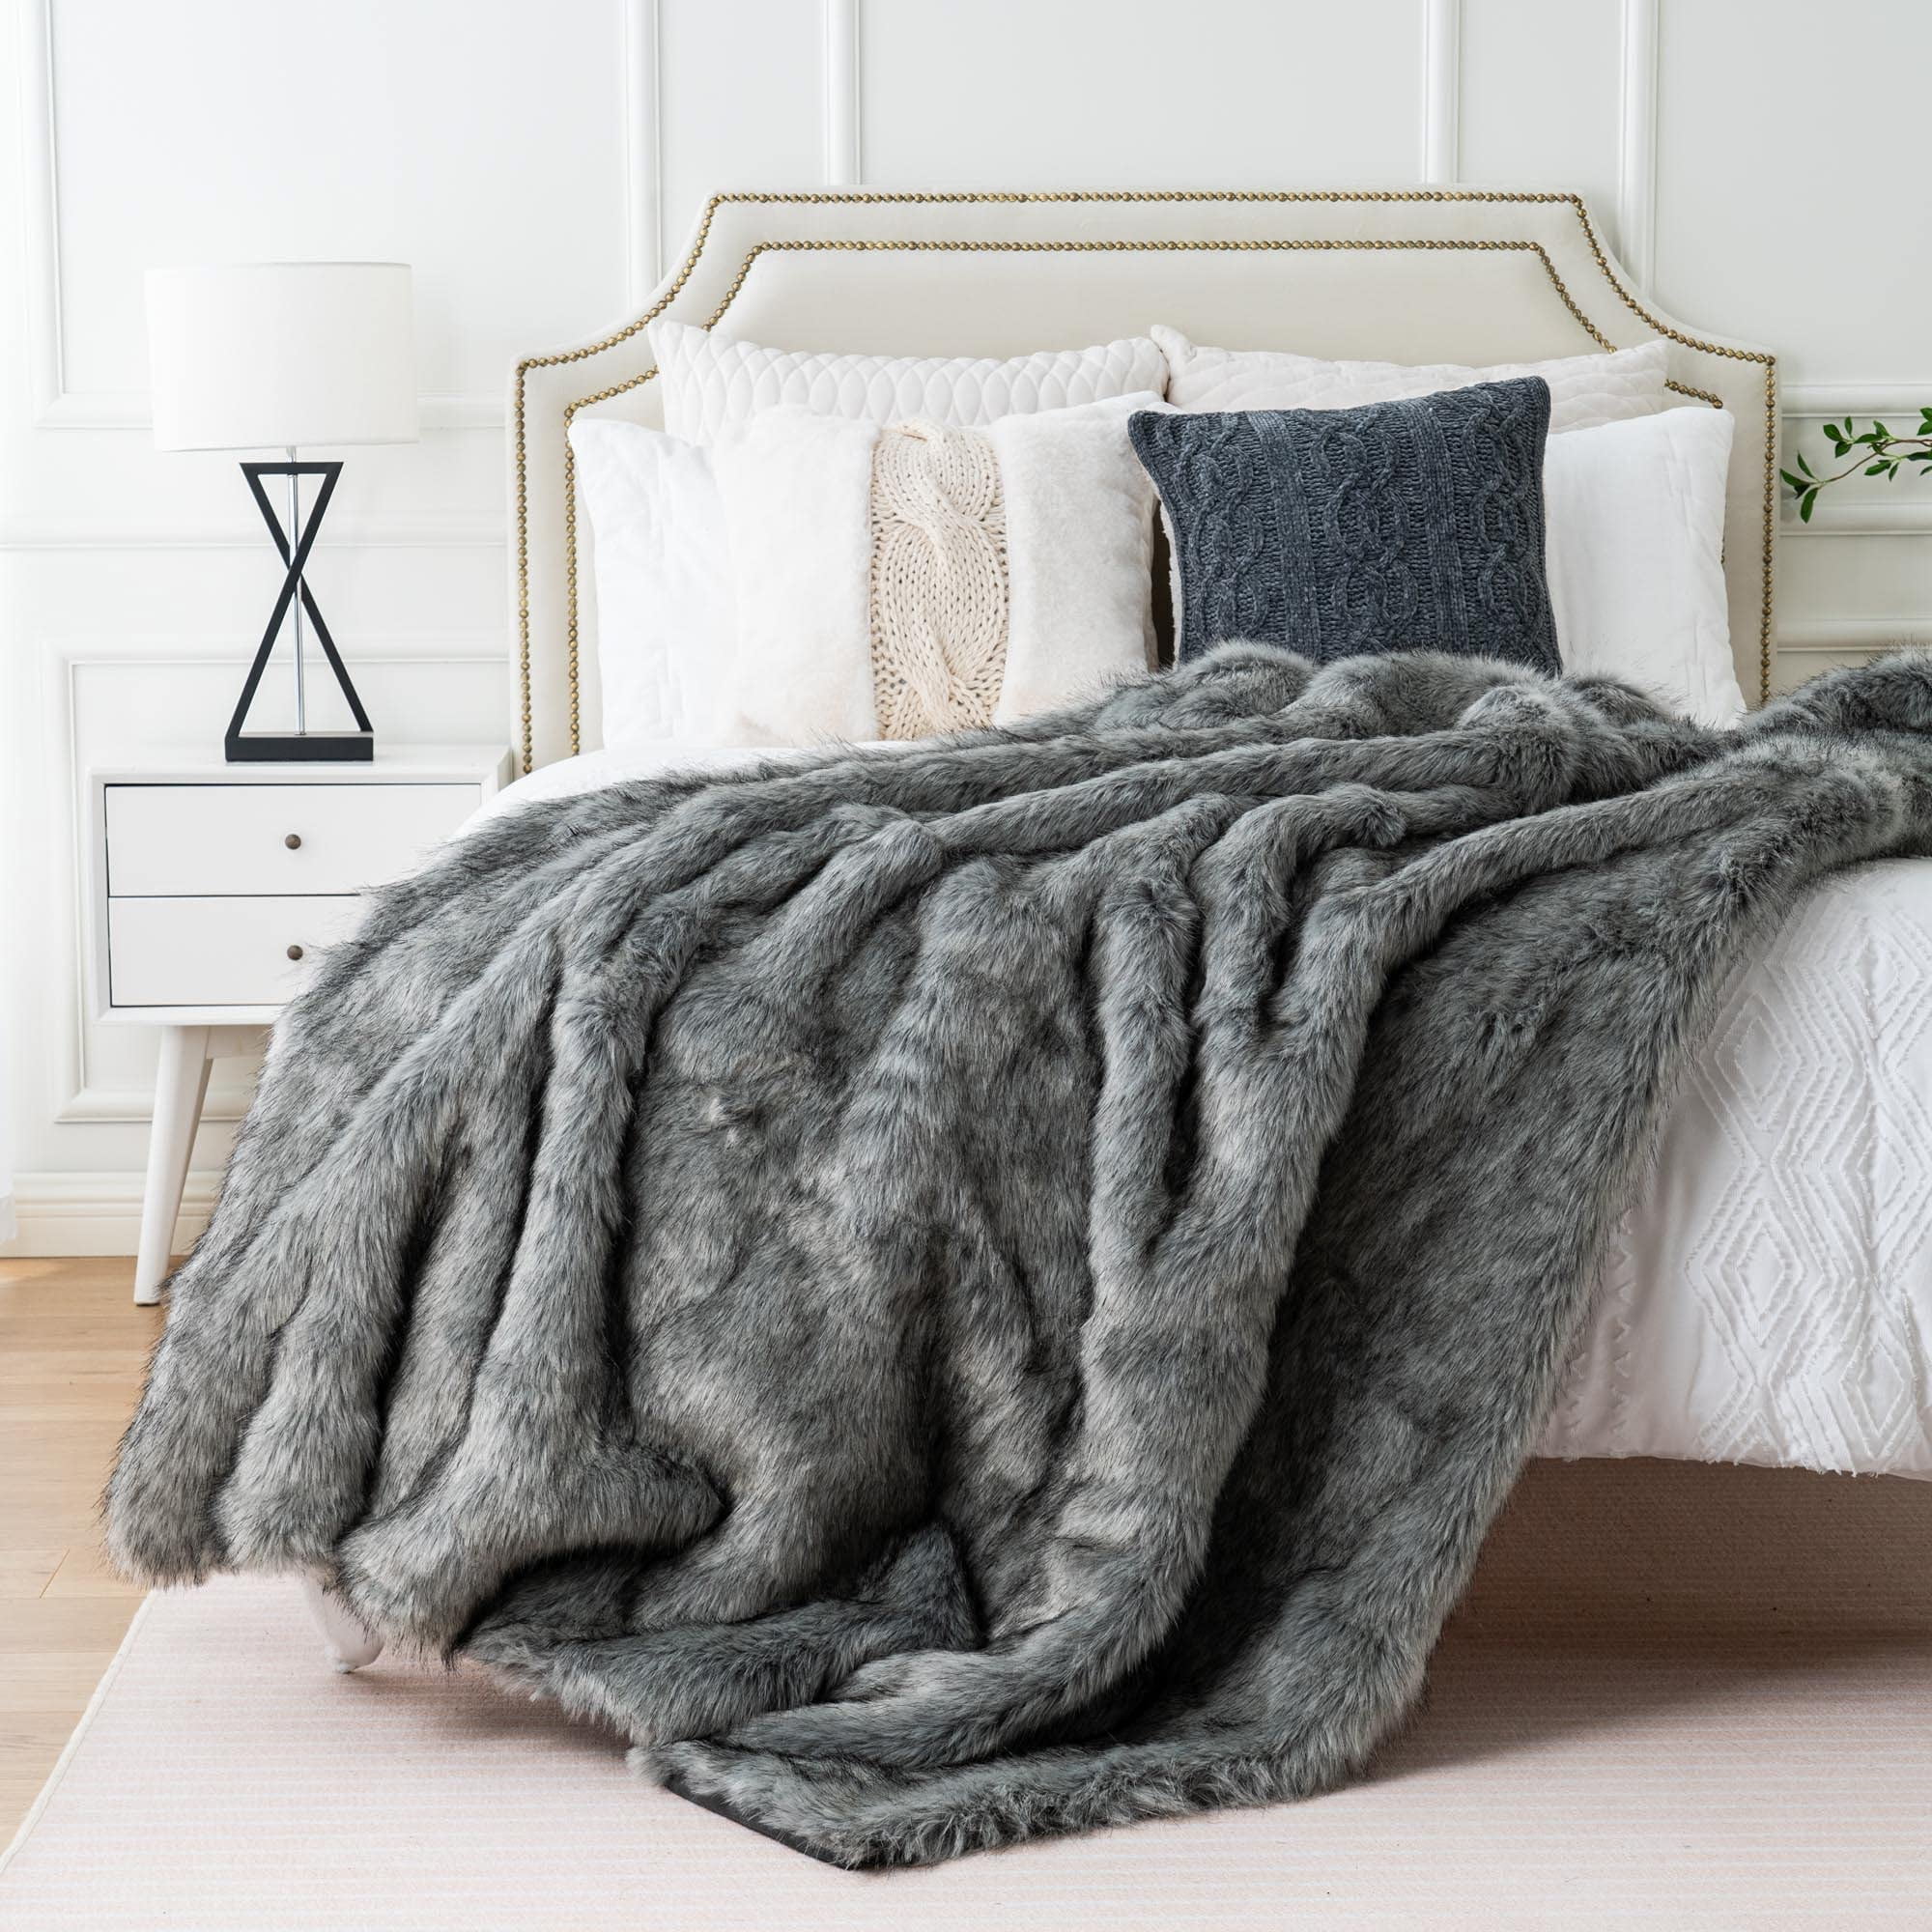  BATTILO HOME Luxury White Faux Fur Throw Blanket Long Pile with  Black Tips, 51x67, Super Warm Thick Faux Fur Blanket for Couch, Bed,  Fuzzy Fluffy Elegant Cozy Blanket : Home 